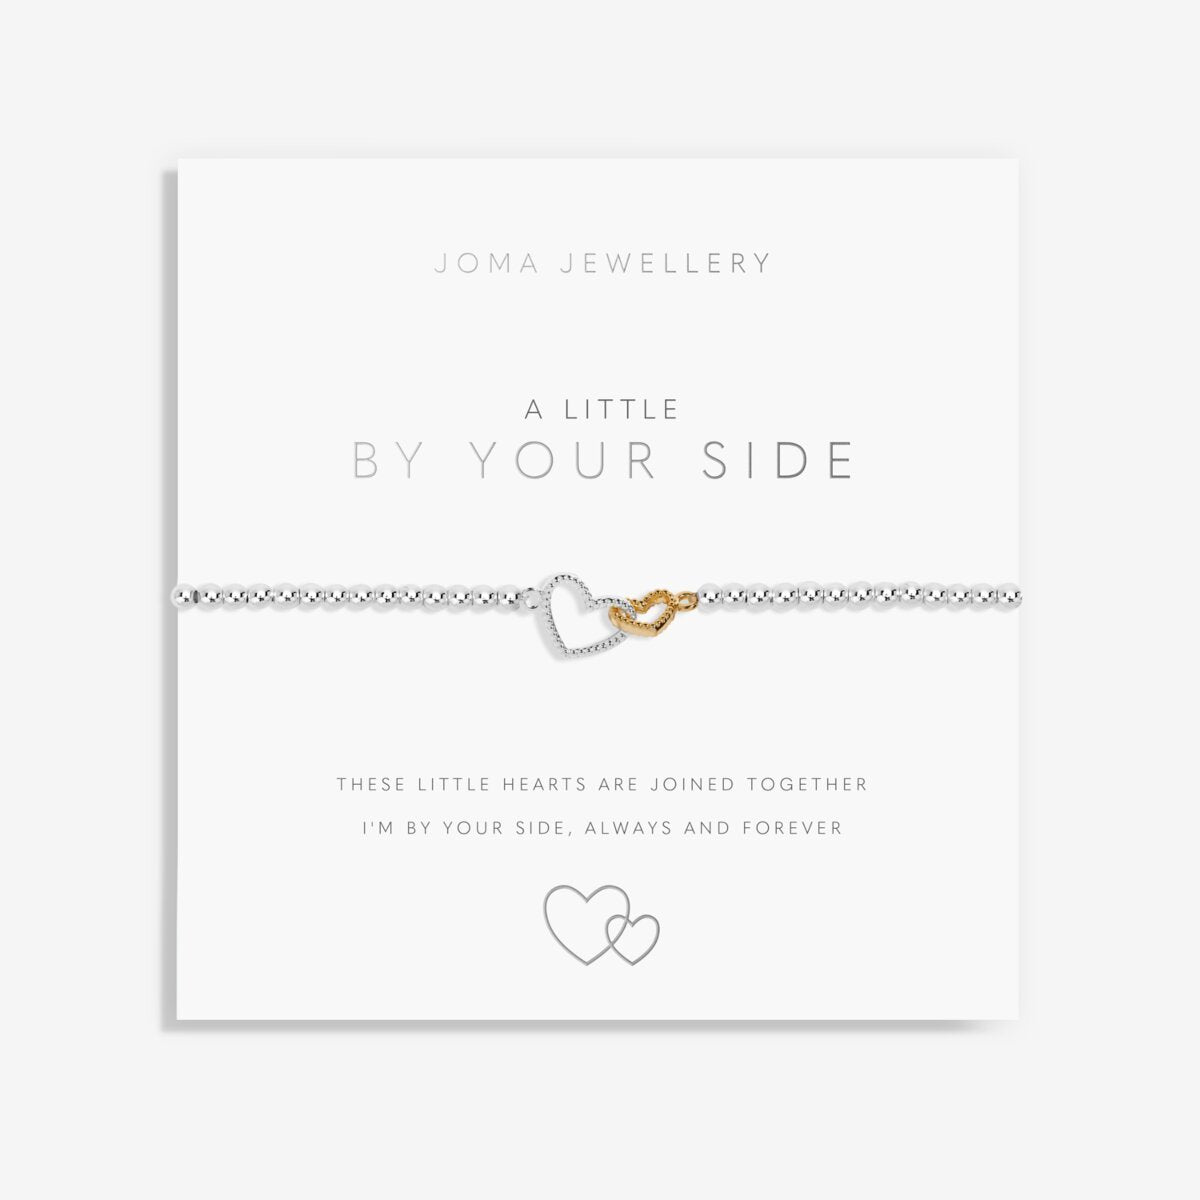 Joma Jewellery 'A Little' By Your Side